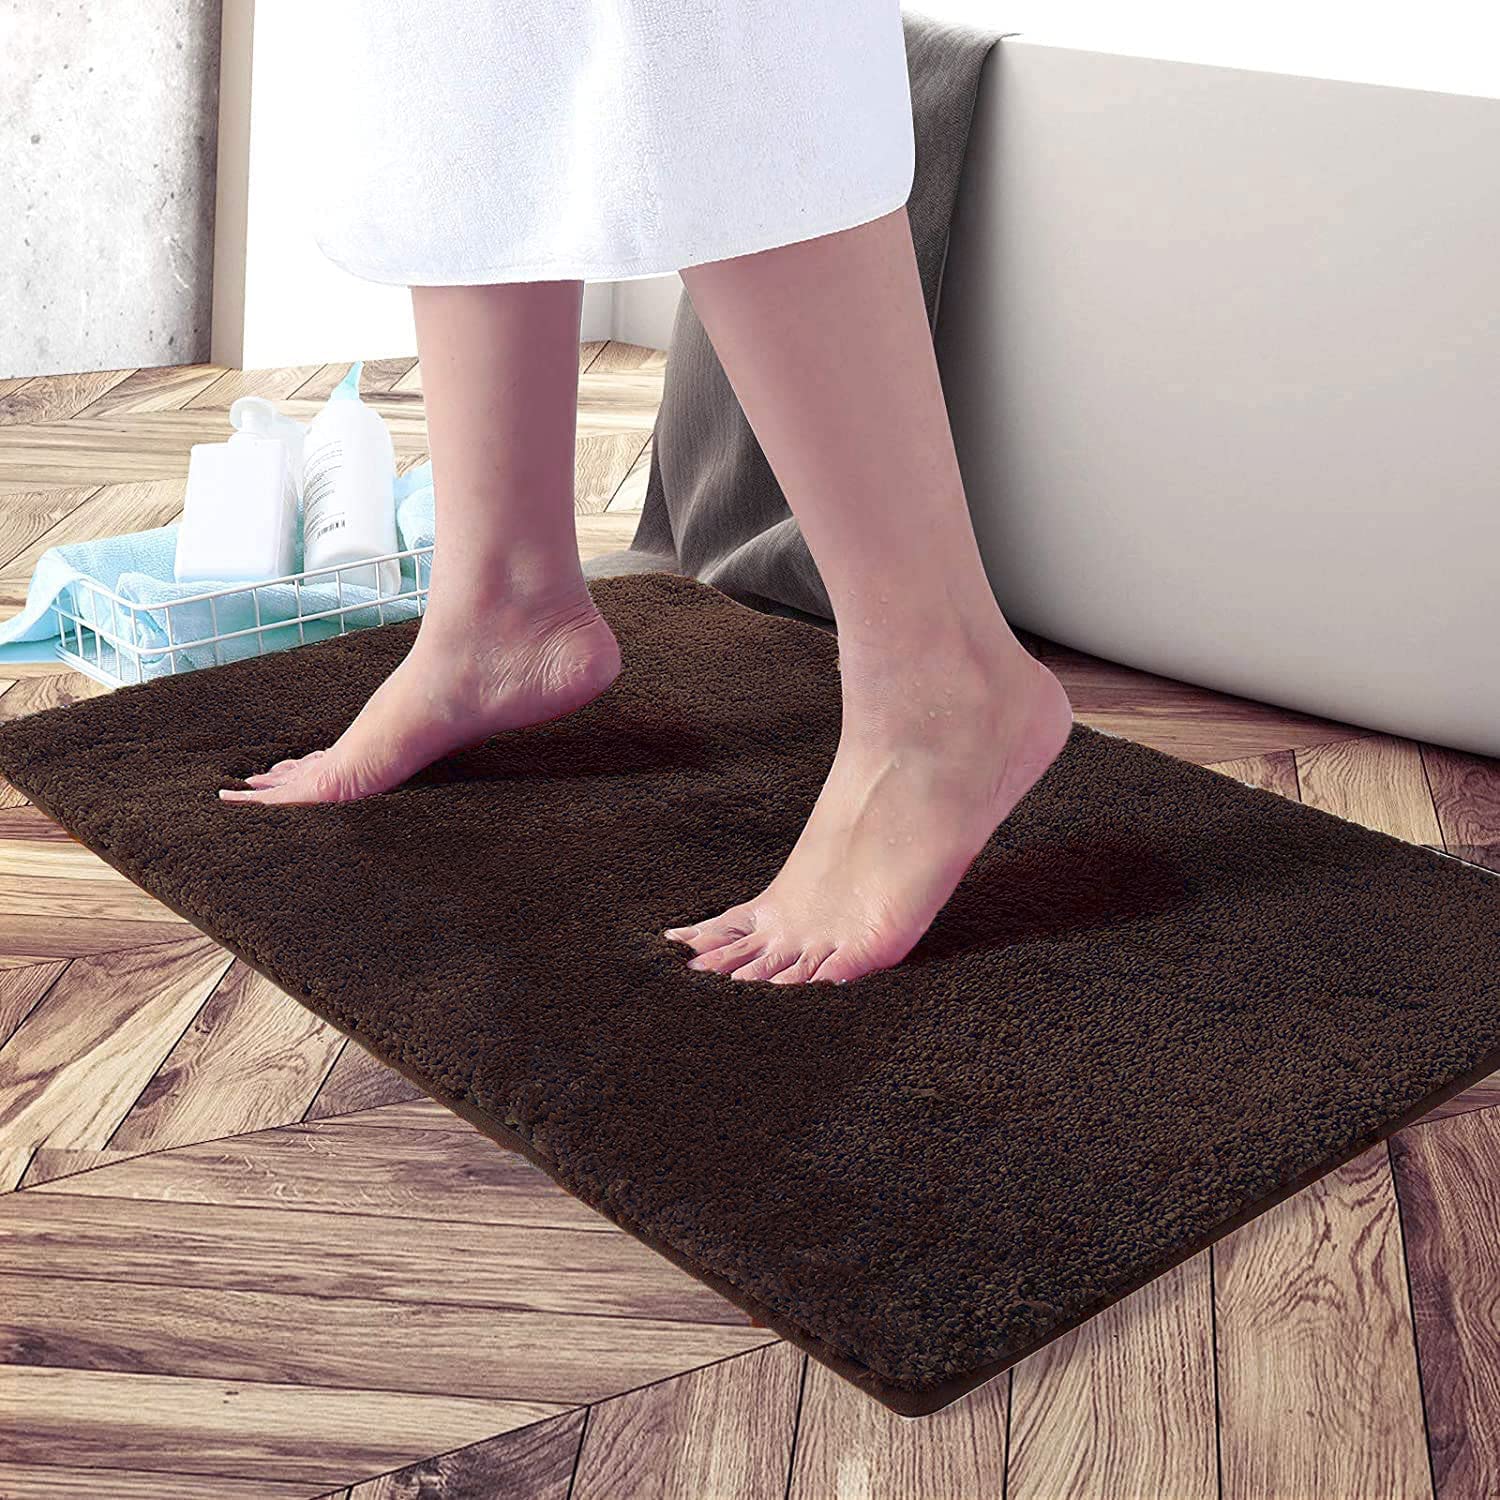 Bathroom Anti-slip Soft and Comfortable Quickly Absorb Water Machine Washable Design Bedroom Mats